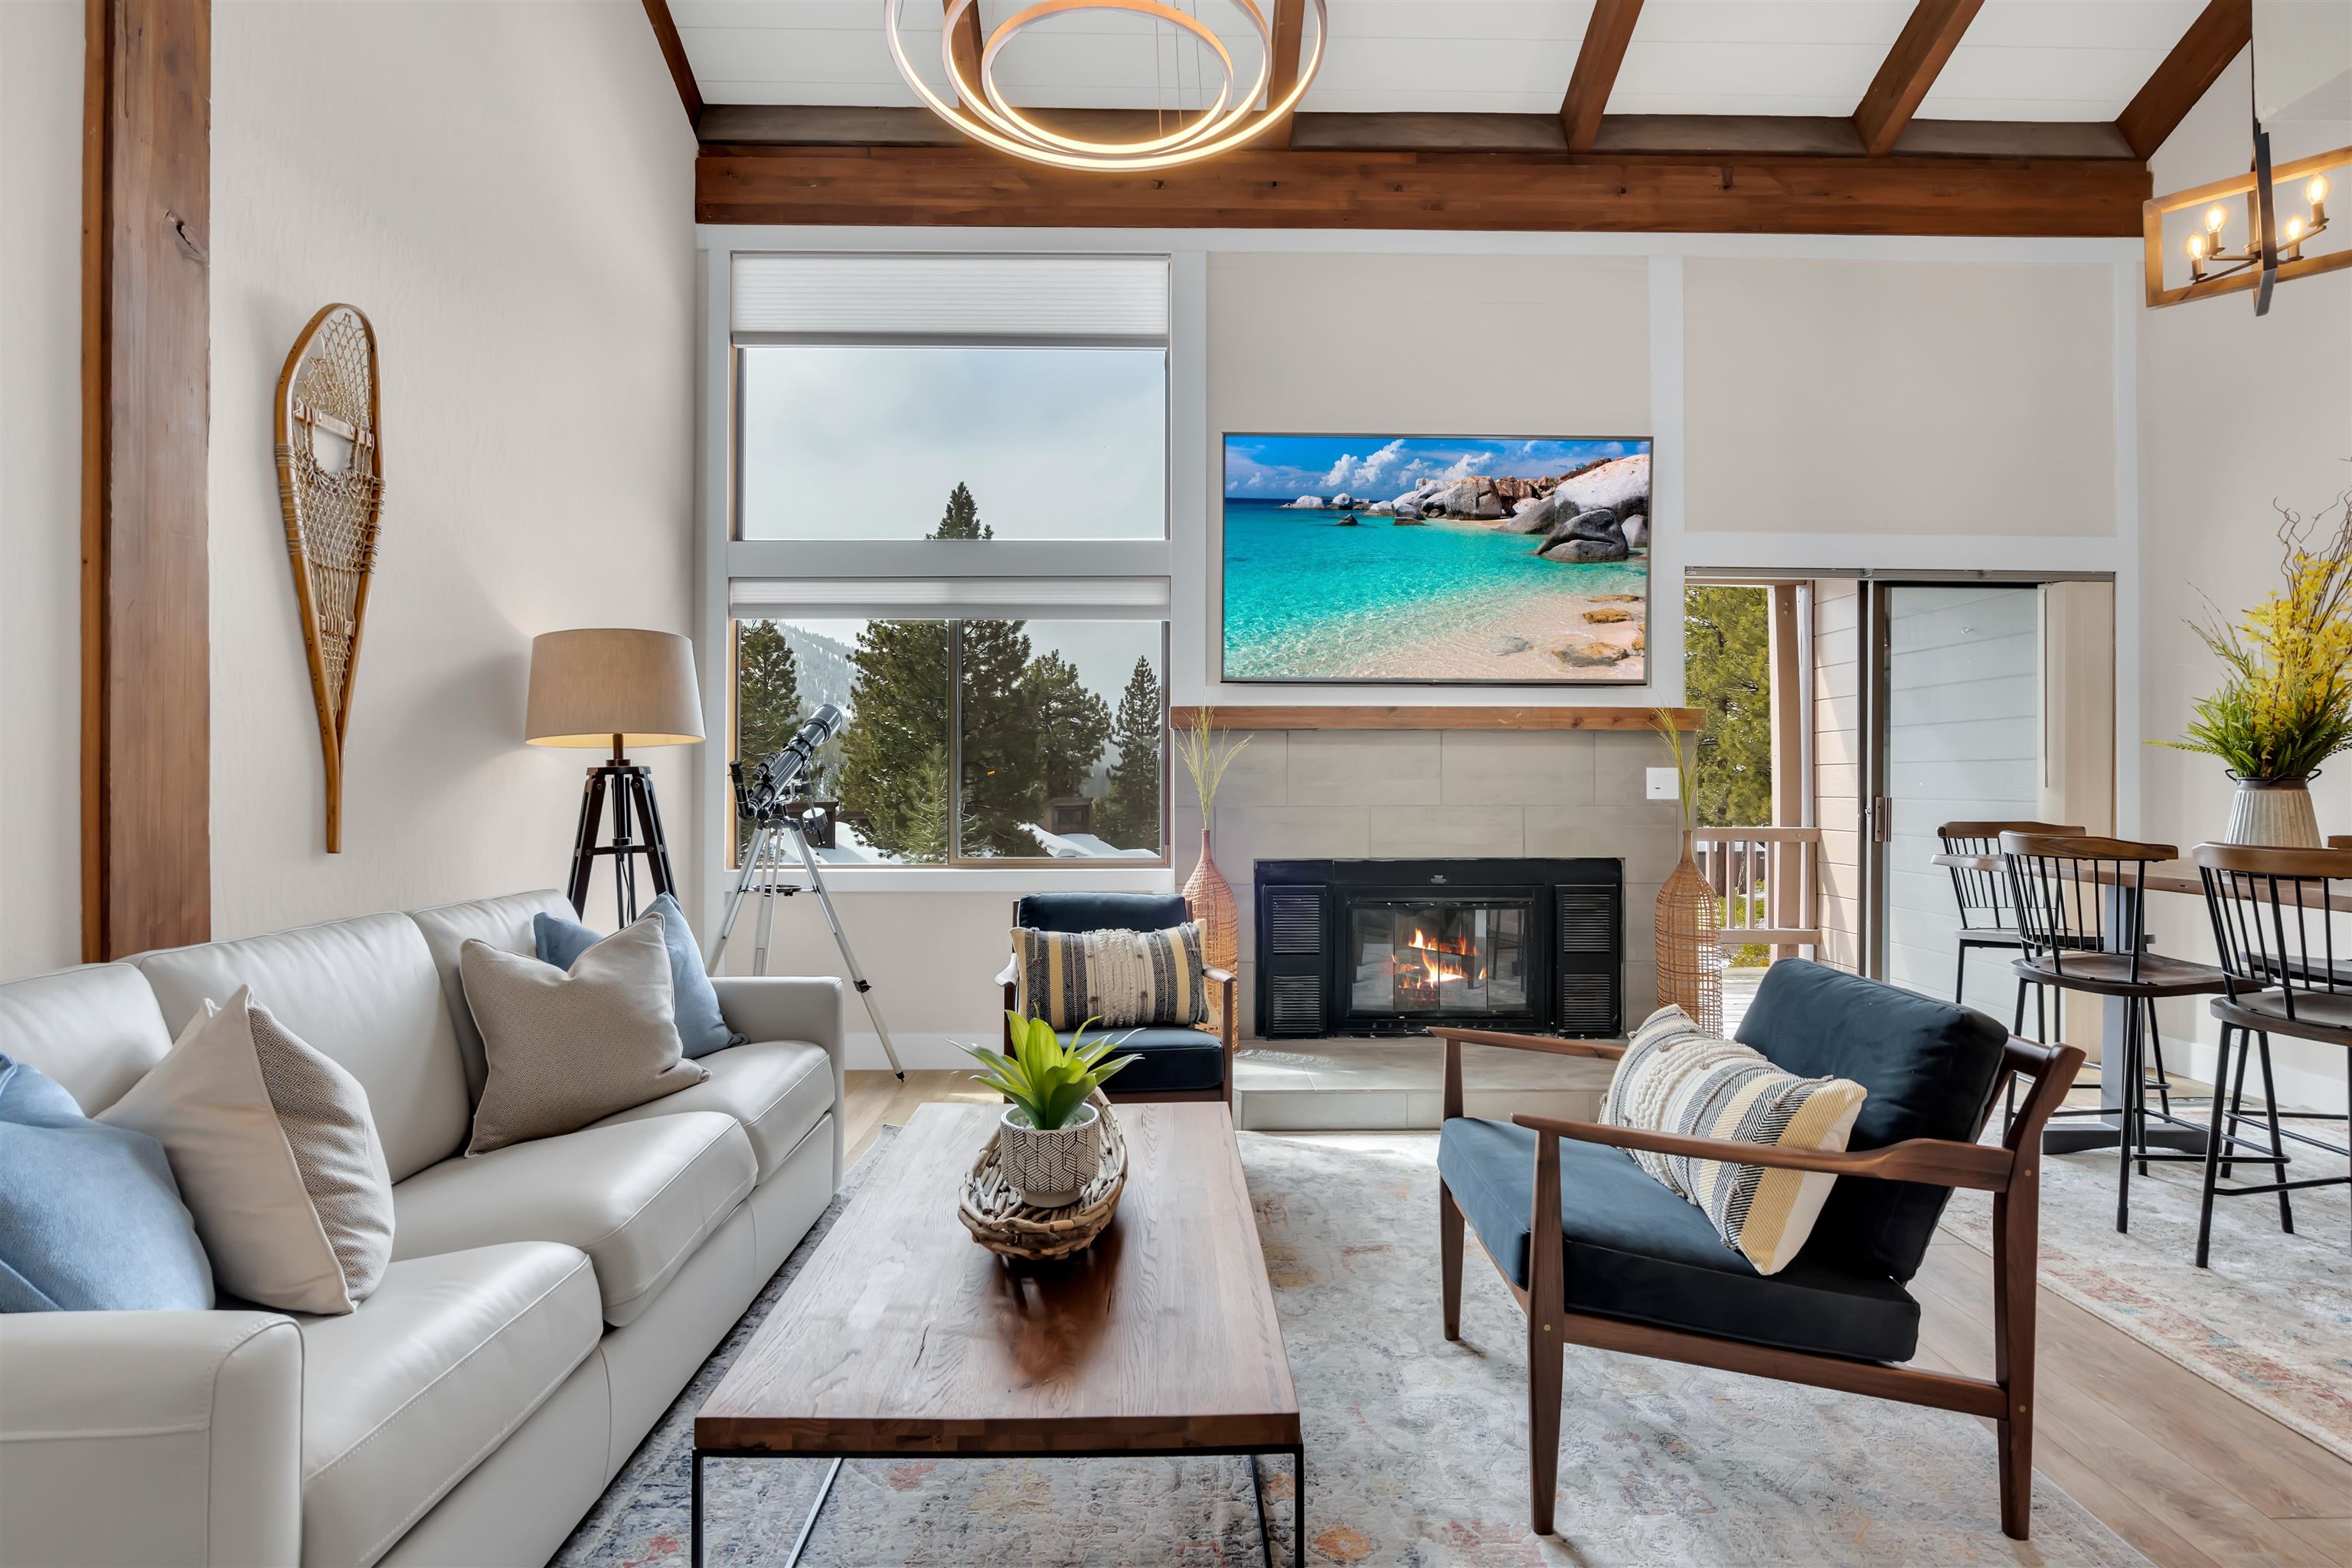 Image for 6081 Rocky Point Circle, Truckee, CA 96161